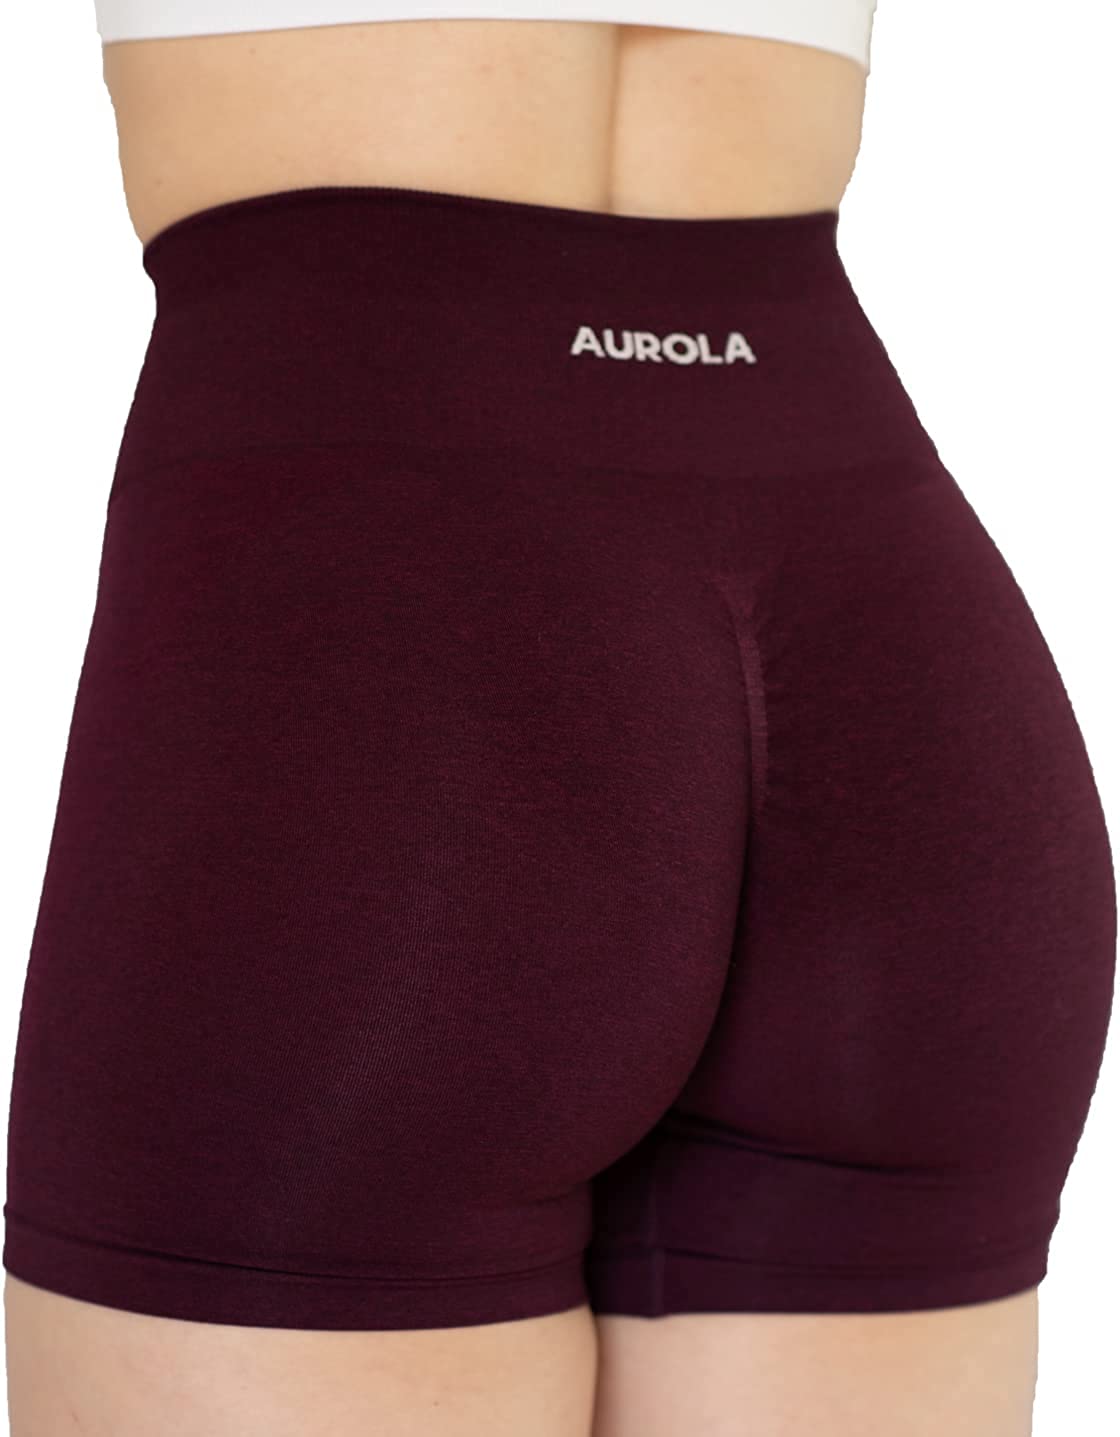 AUROLA Intensify Workout Shorts 3 Pieces Pack Sets for Women